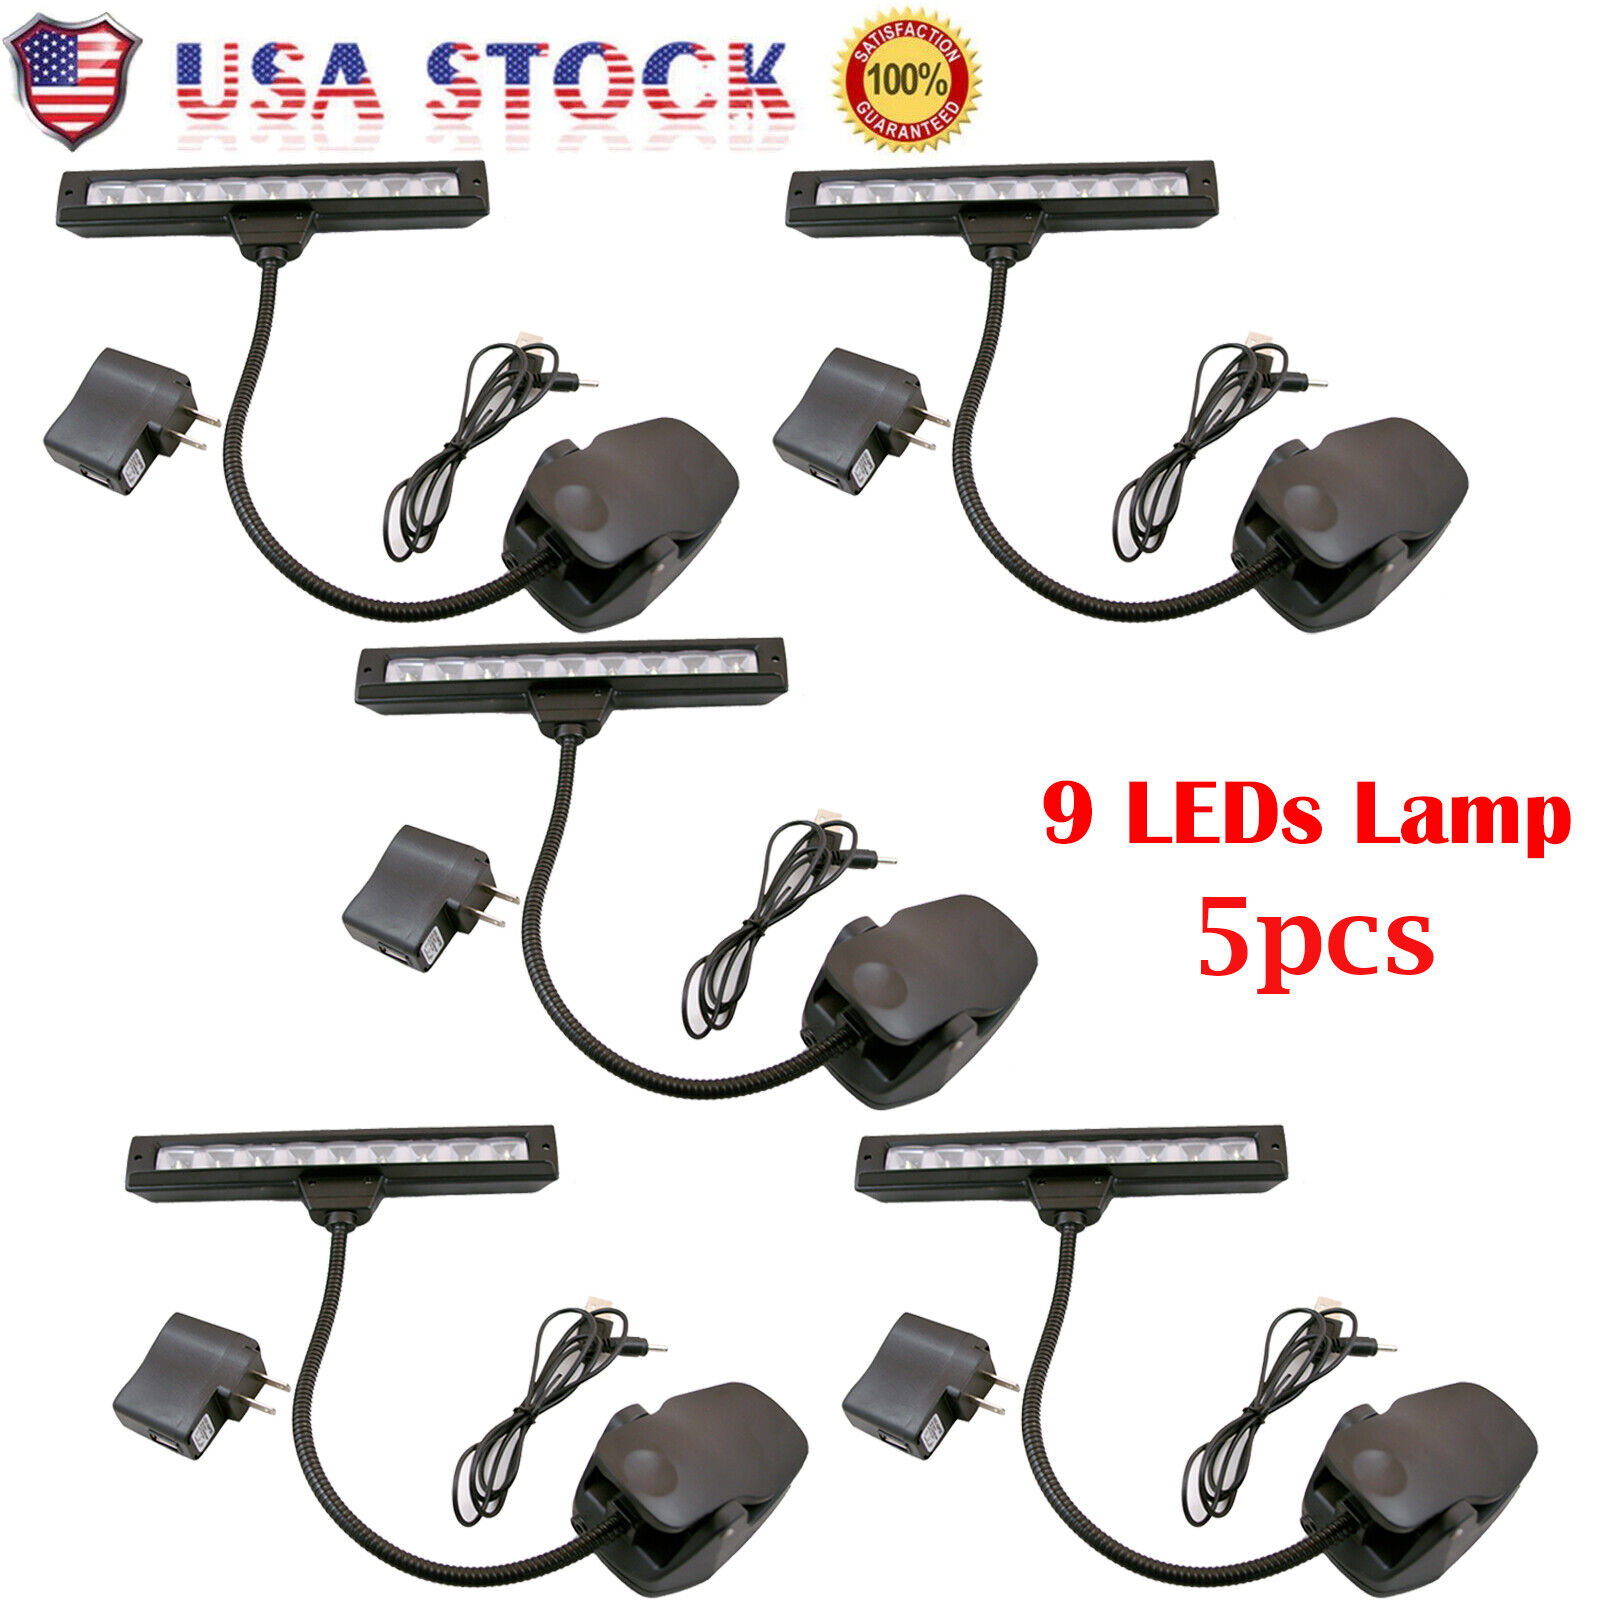 5pcs 9 LEDs Flexible Lamp Light Clip-On Orchestra Music Stand With Adapter Black Unbranded/Generic Does Not Apply